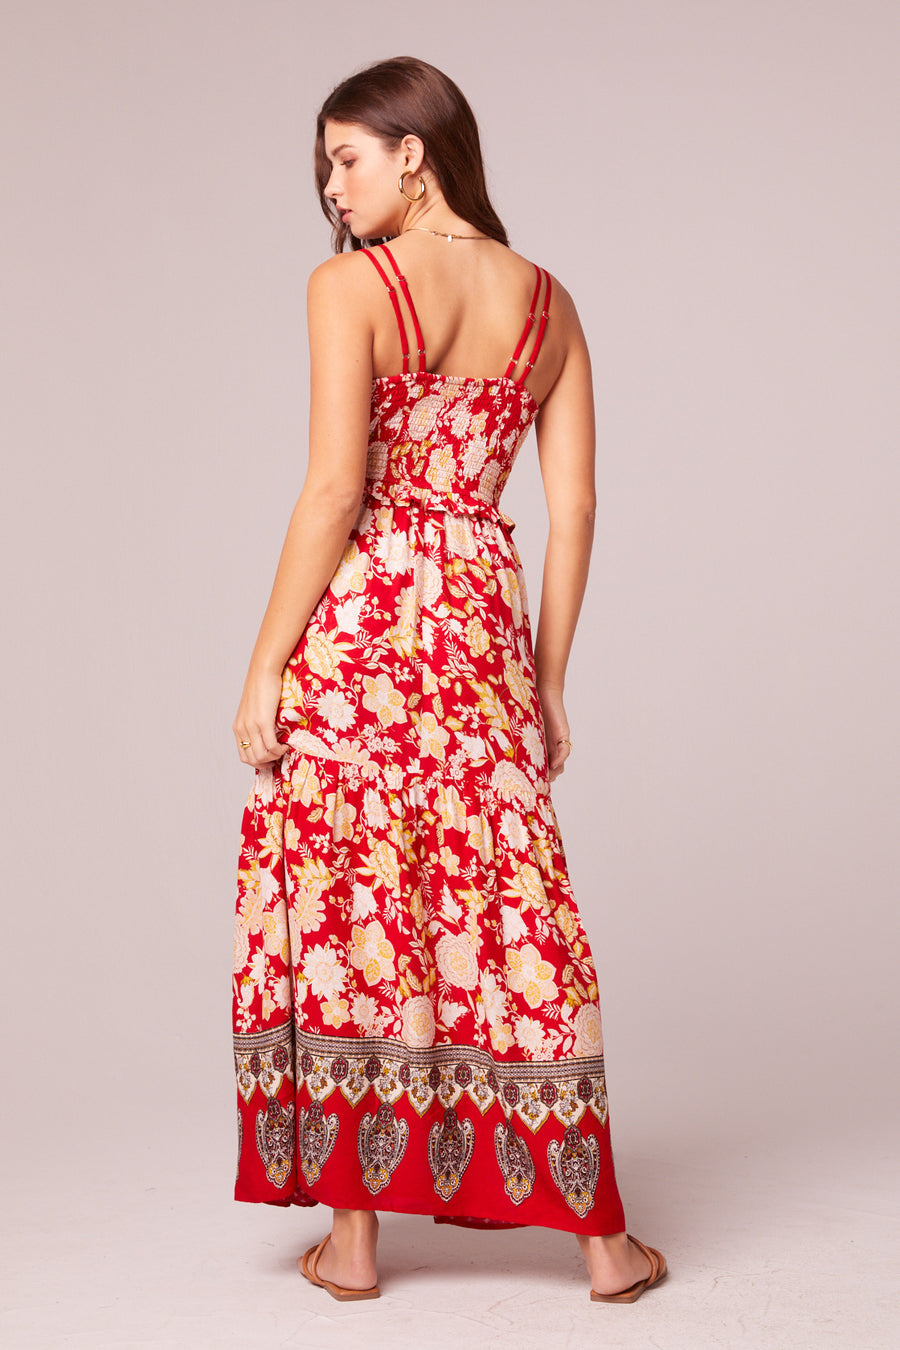 Reflections Red Floral Smocked Waist Maxi Dress